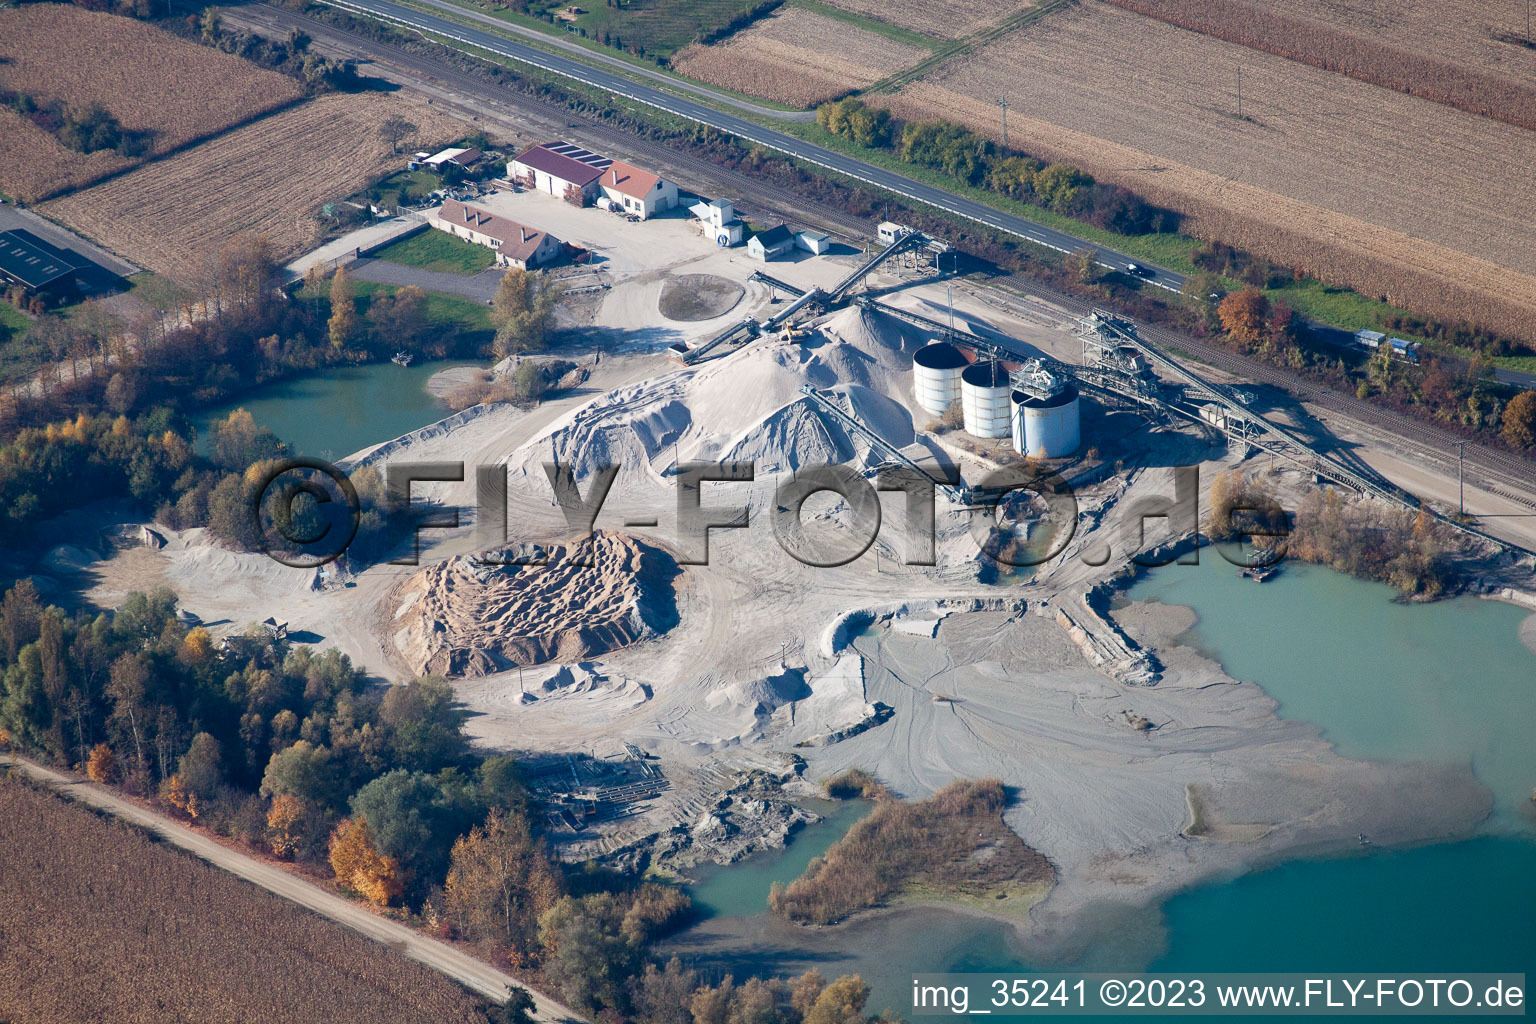 Gravel works in Hagenbach in the state Rhineland-Palatinate, Germany